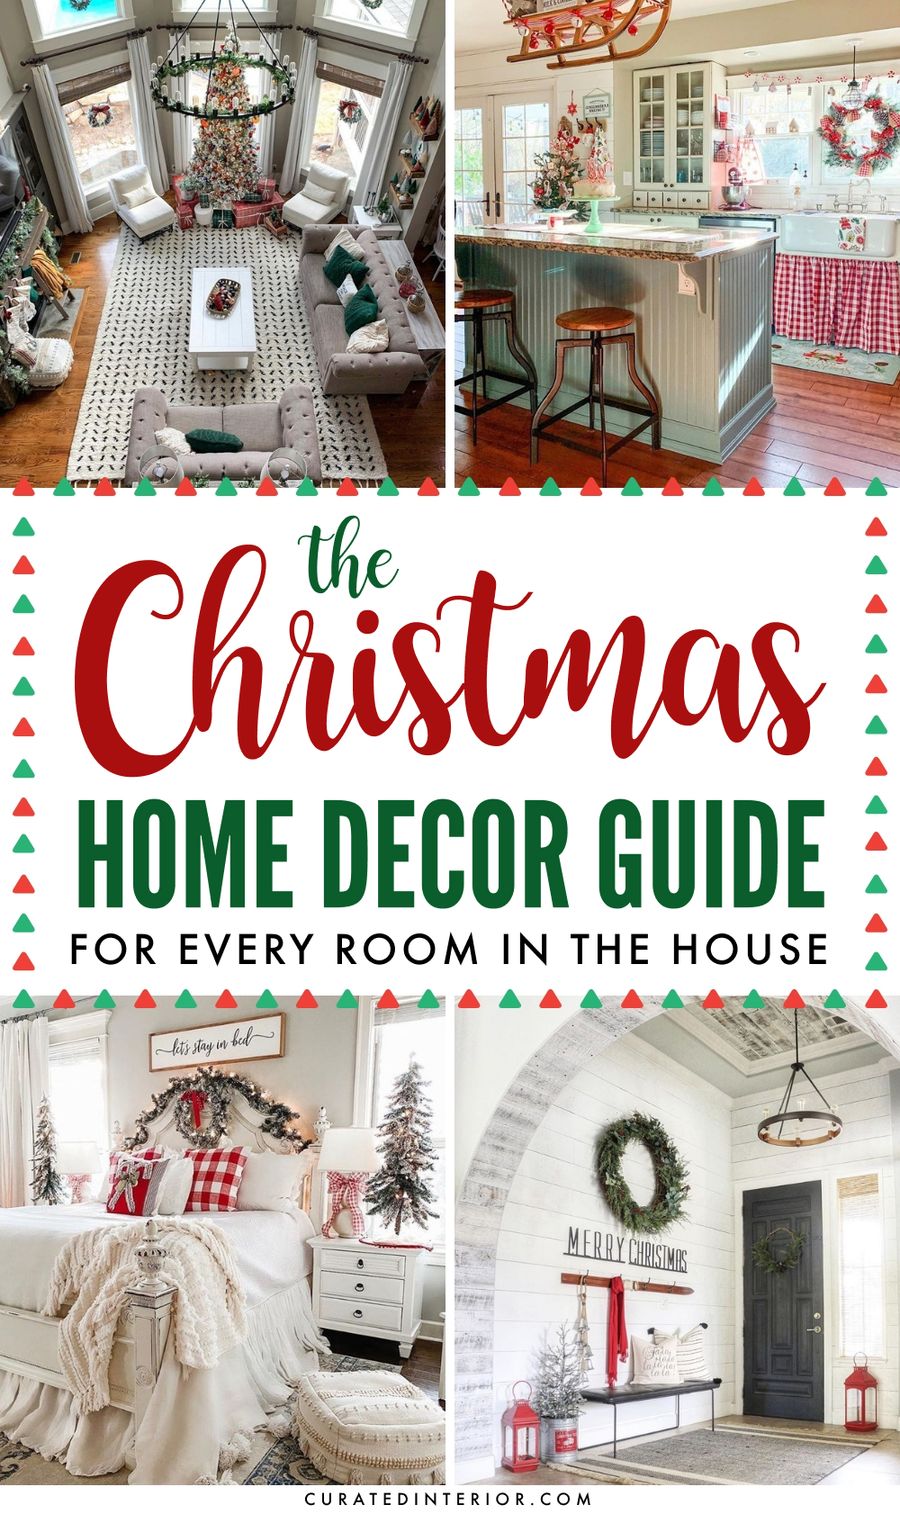 The Christmas Home Decor Guide for Every Room in the House